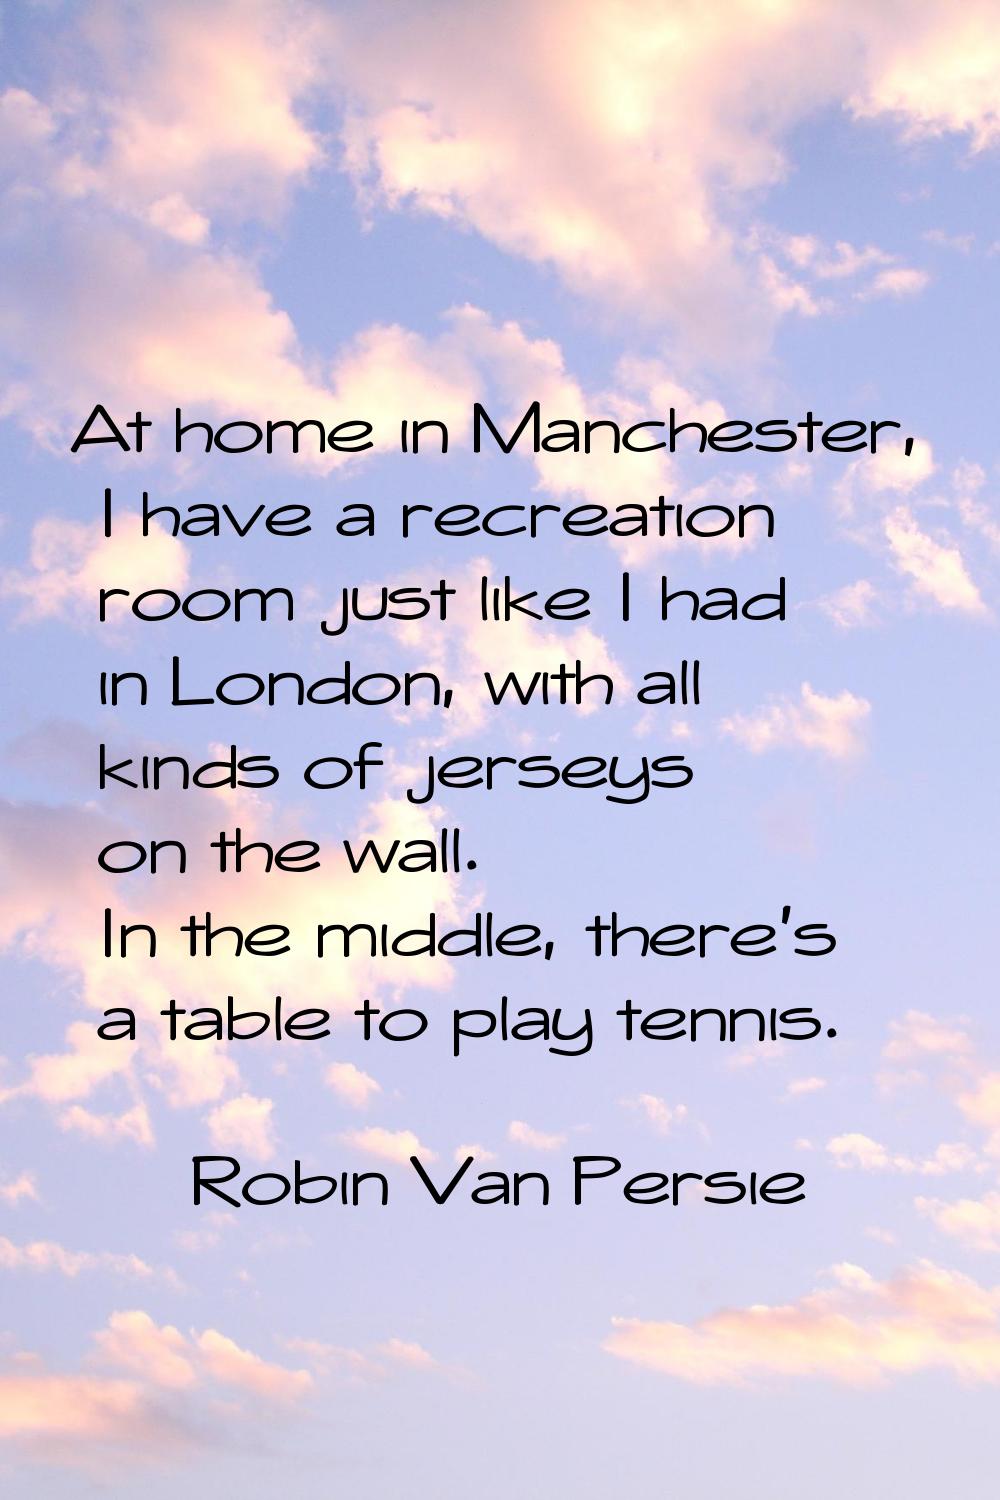 At home in Manchester, I have a recreation room just like I had in London, with all kinds of jersey